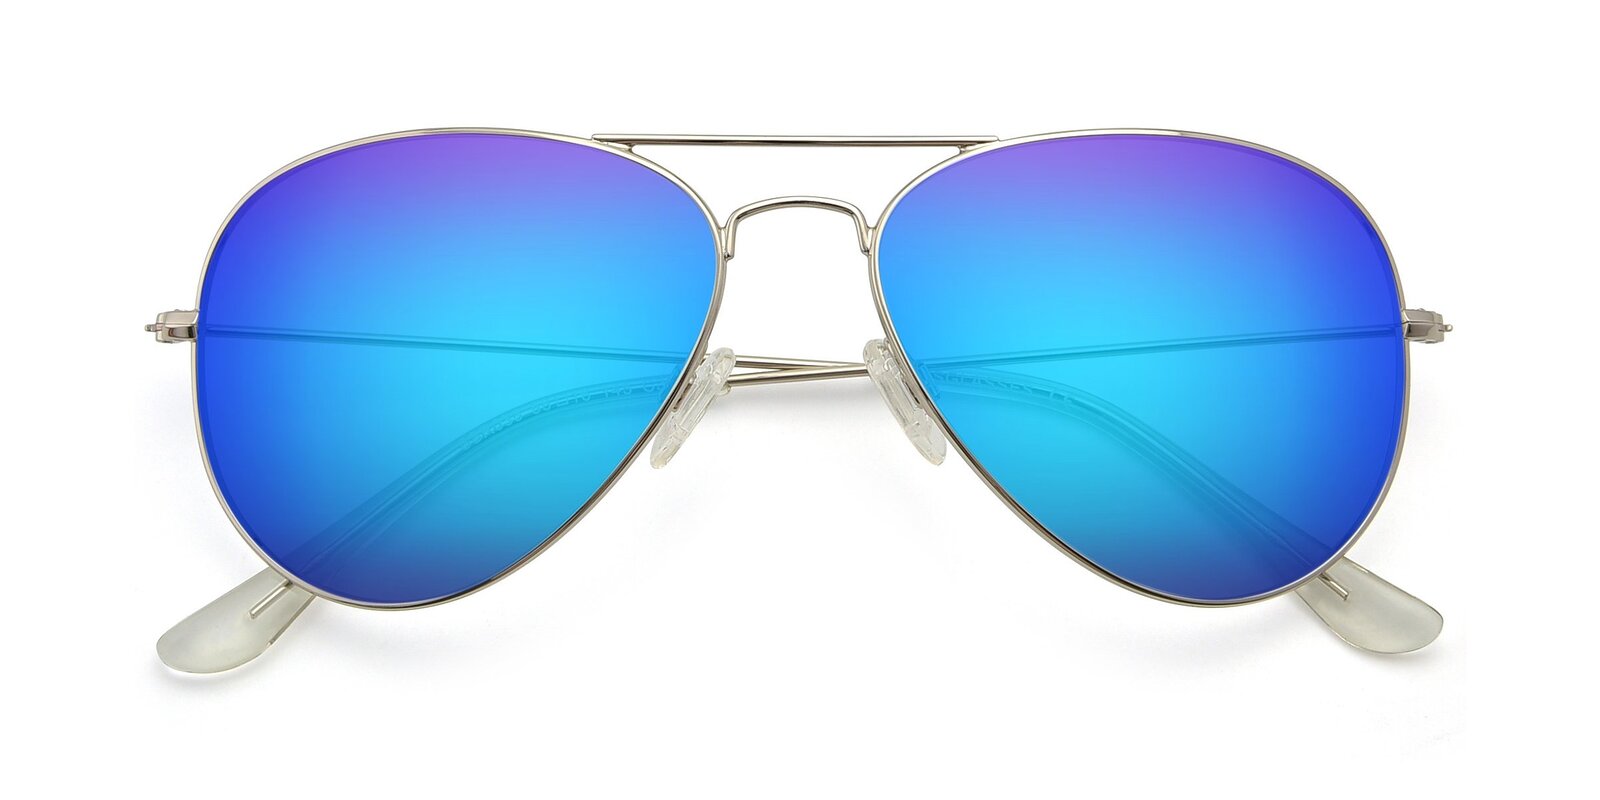 Silver Oversized Thin Aviator Mirrored Polarized Sunglasses with Blue ...